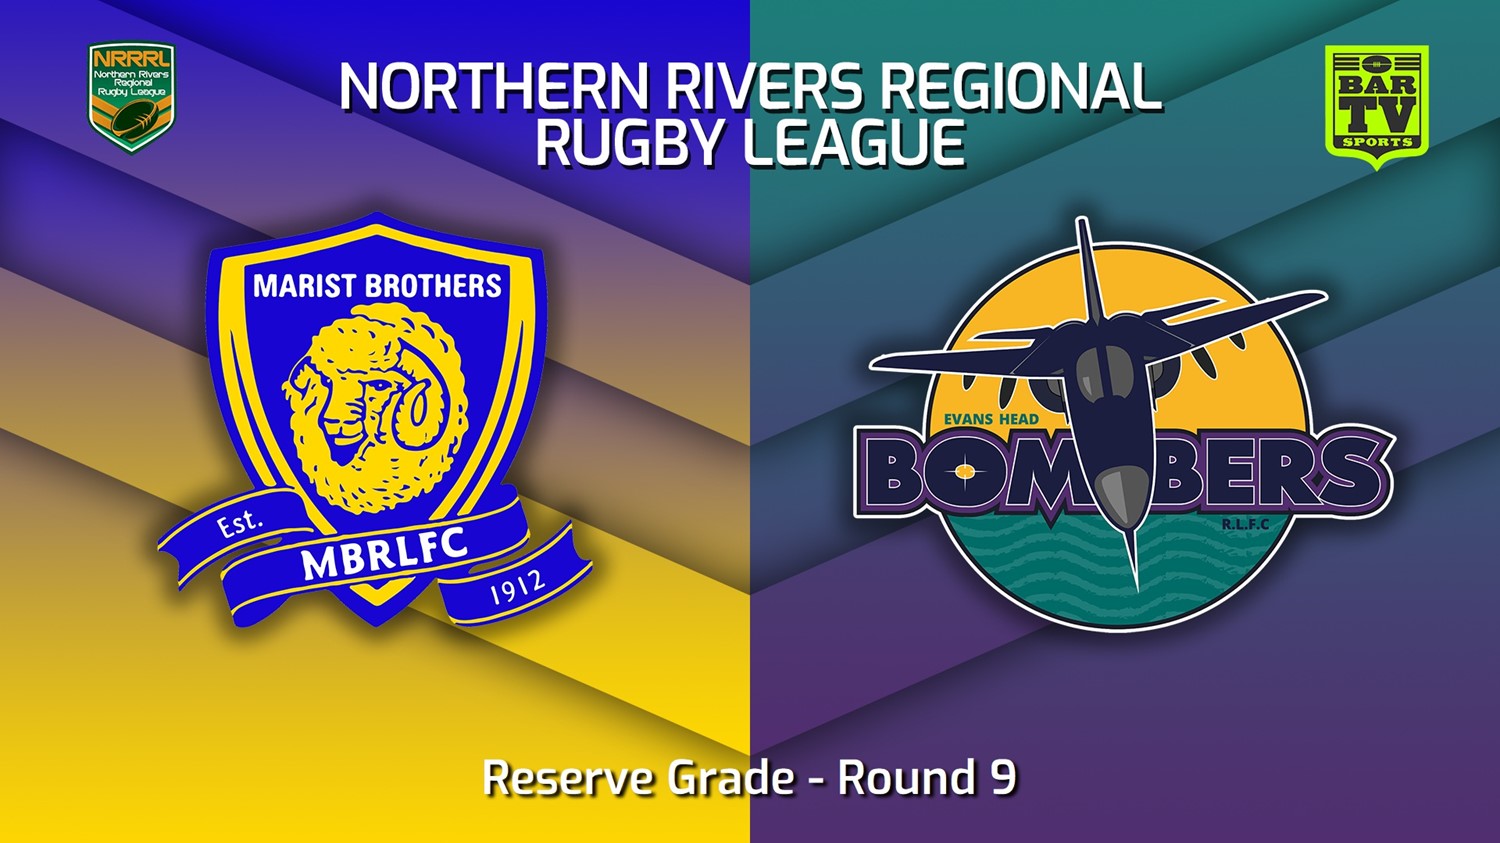 230618-Northern Rivers Round 9 - Reserve Grade - Lismore Marist Brothers v Evans Head Bombers Slate Image